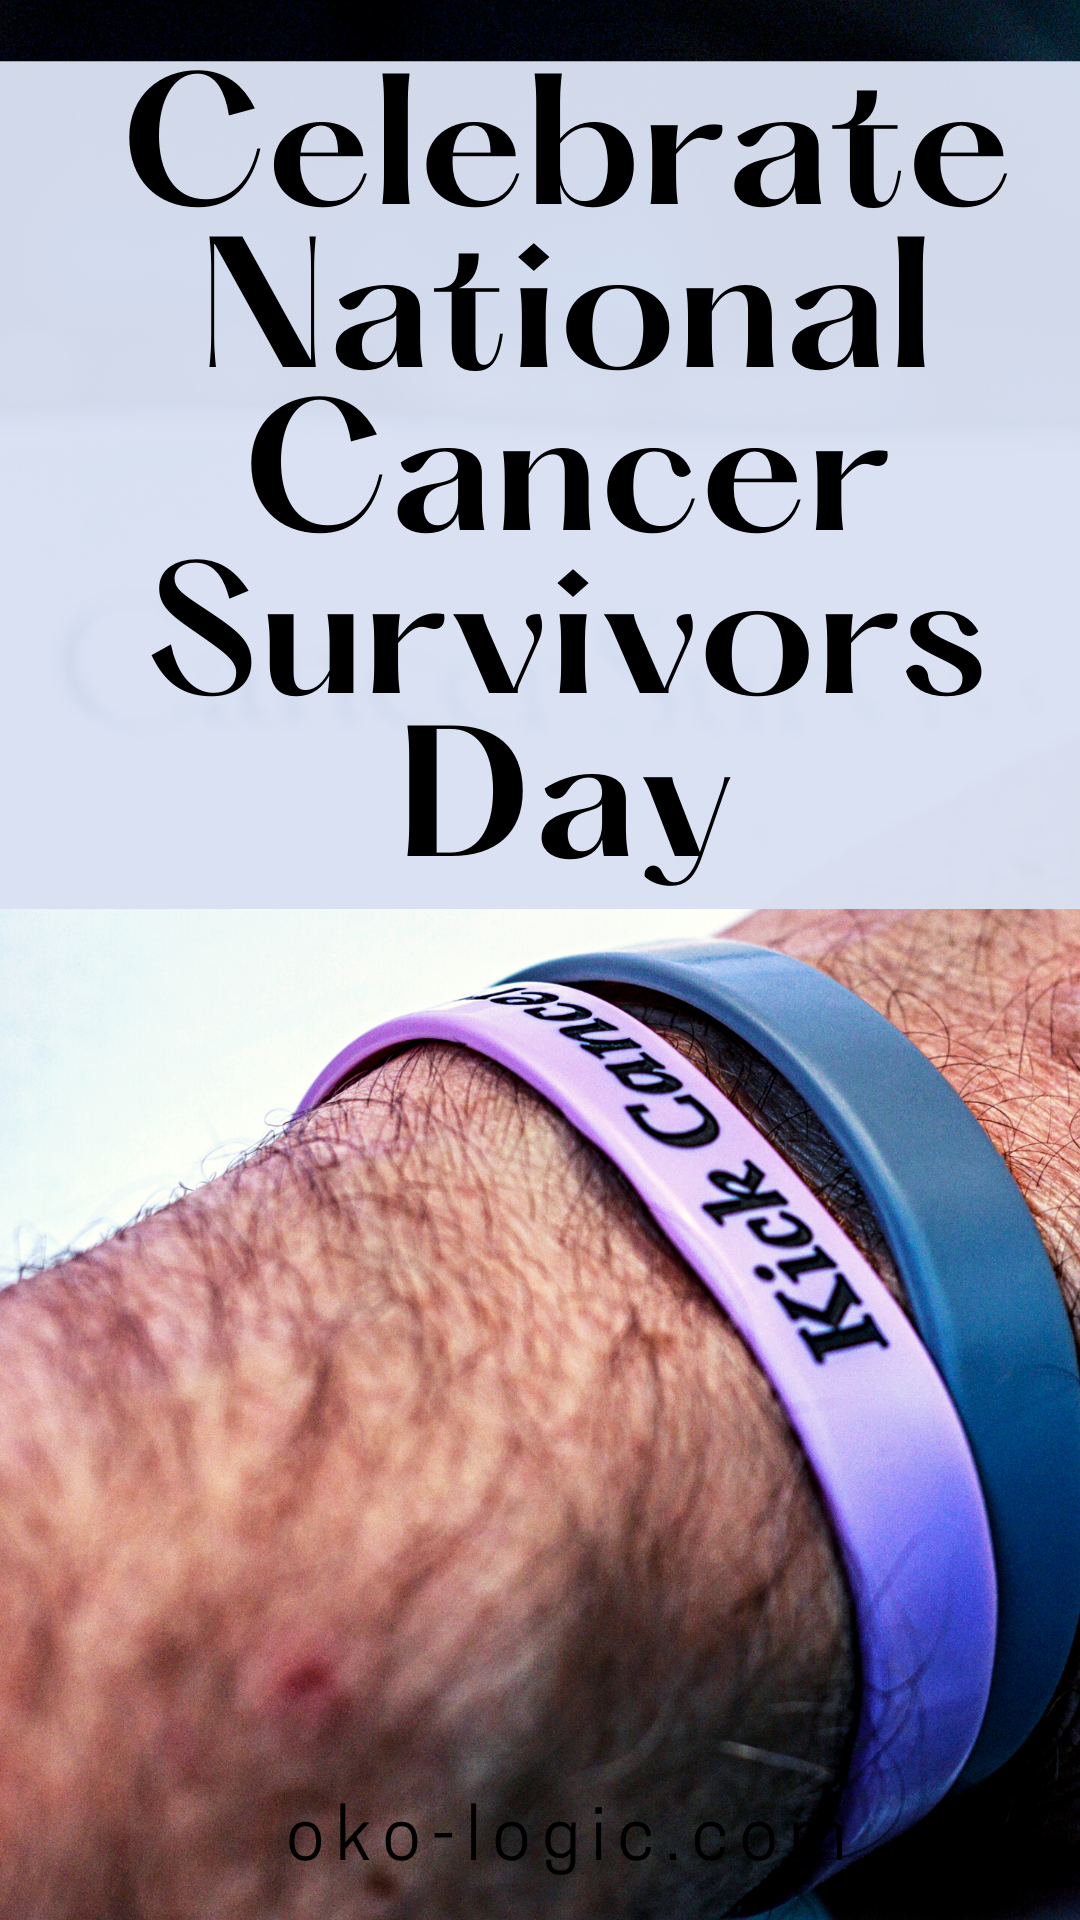 Thoughts on The National Cancer Survivors Day 2022